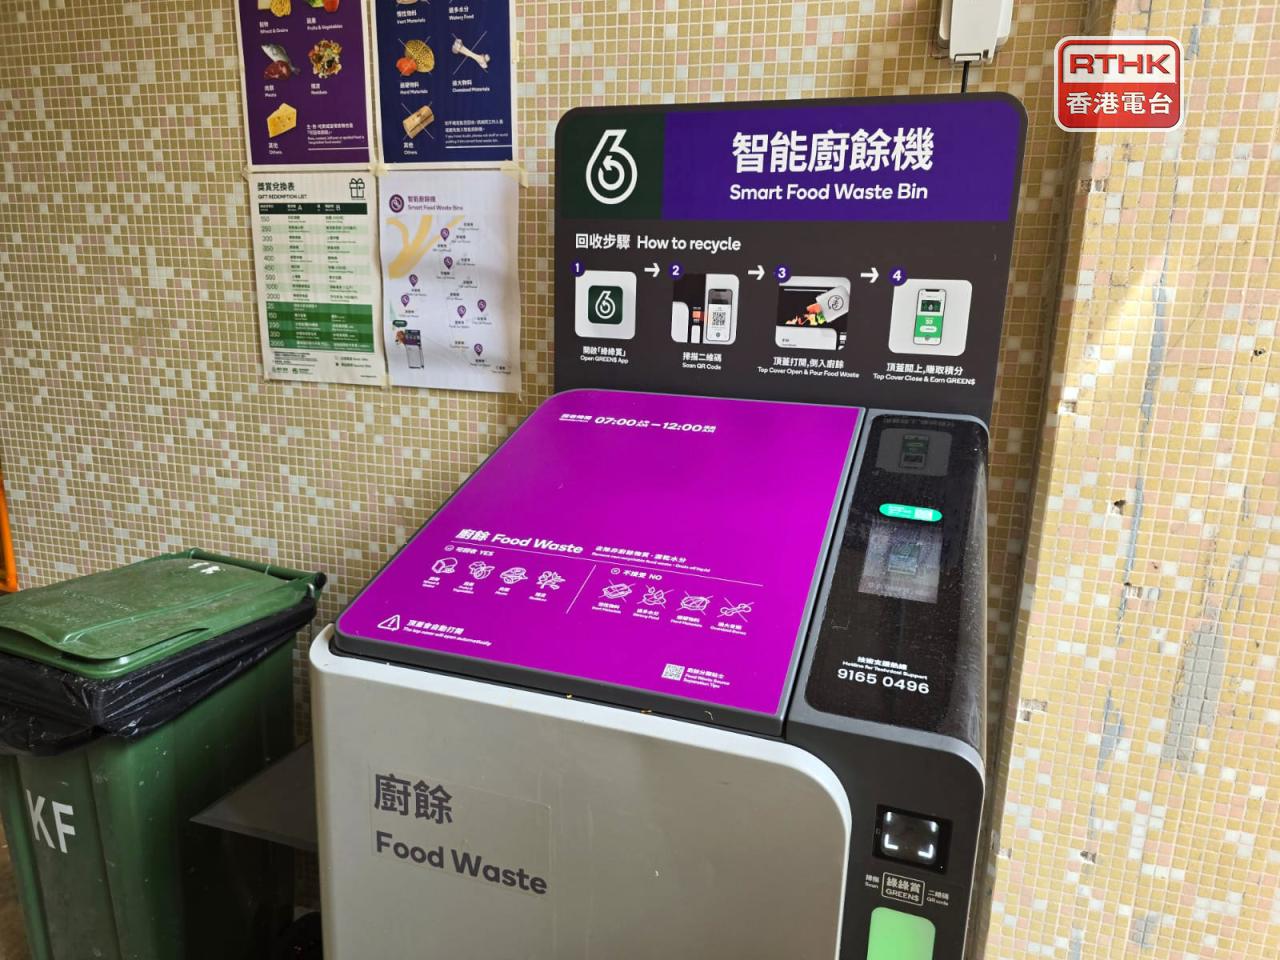 Lawmakers upset over HK's food waste recycling rate